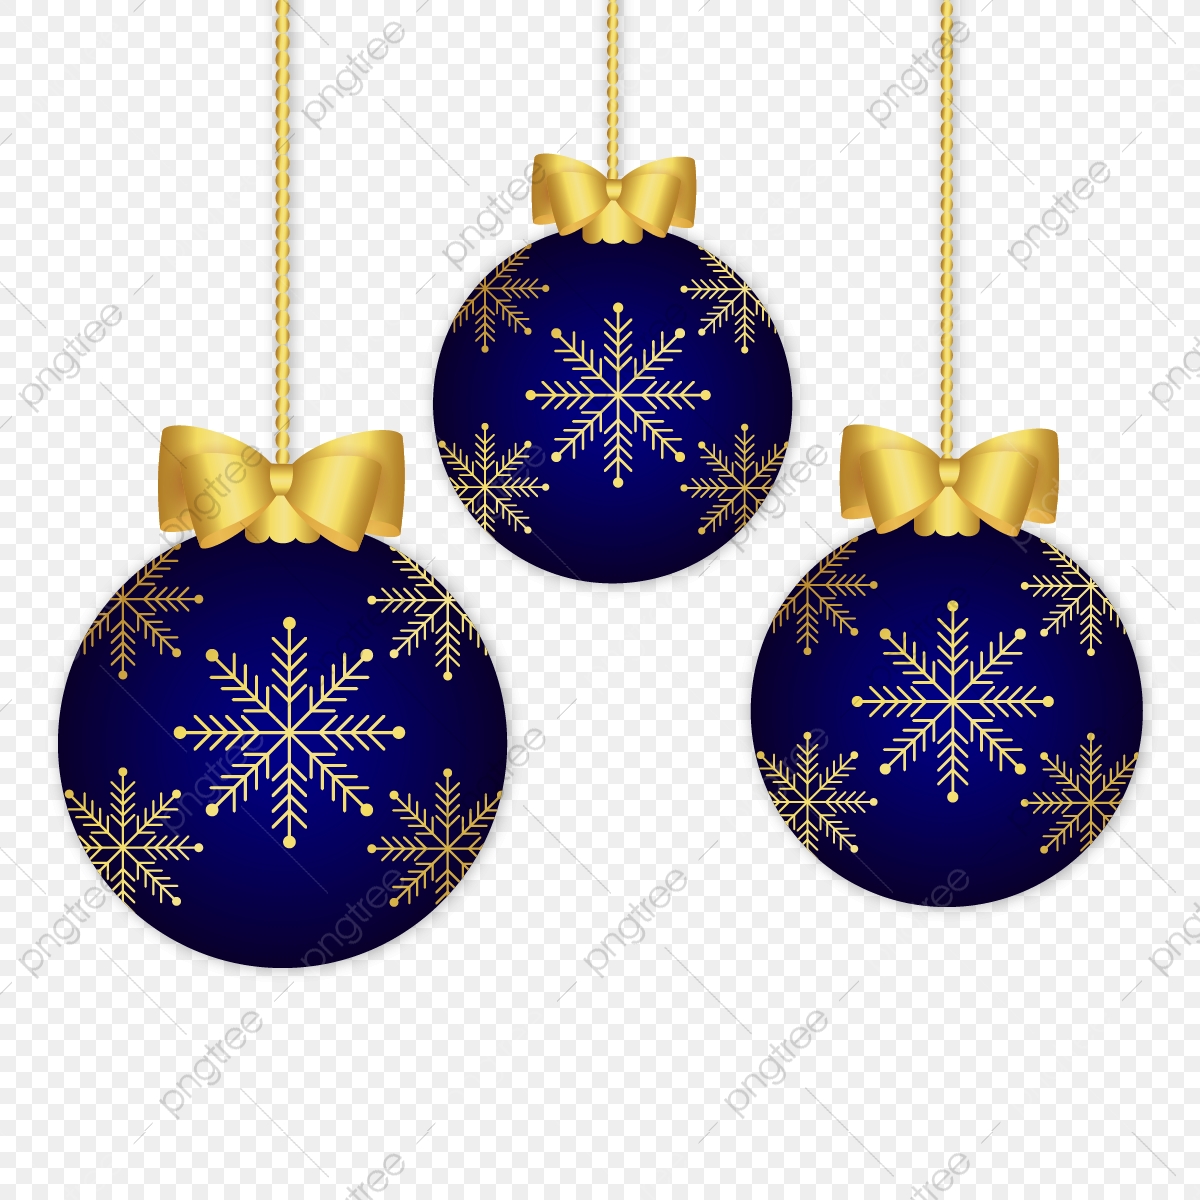 Blue And Gold Christmas Background